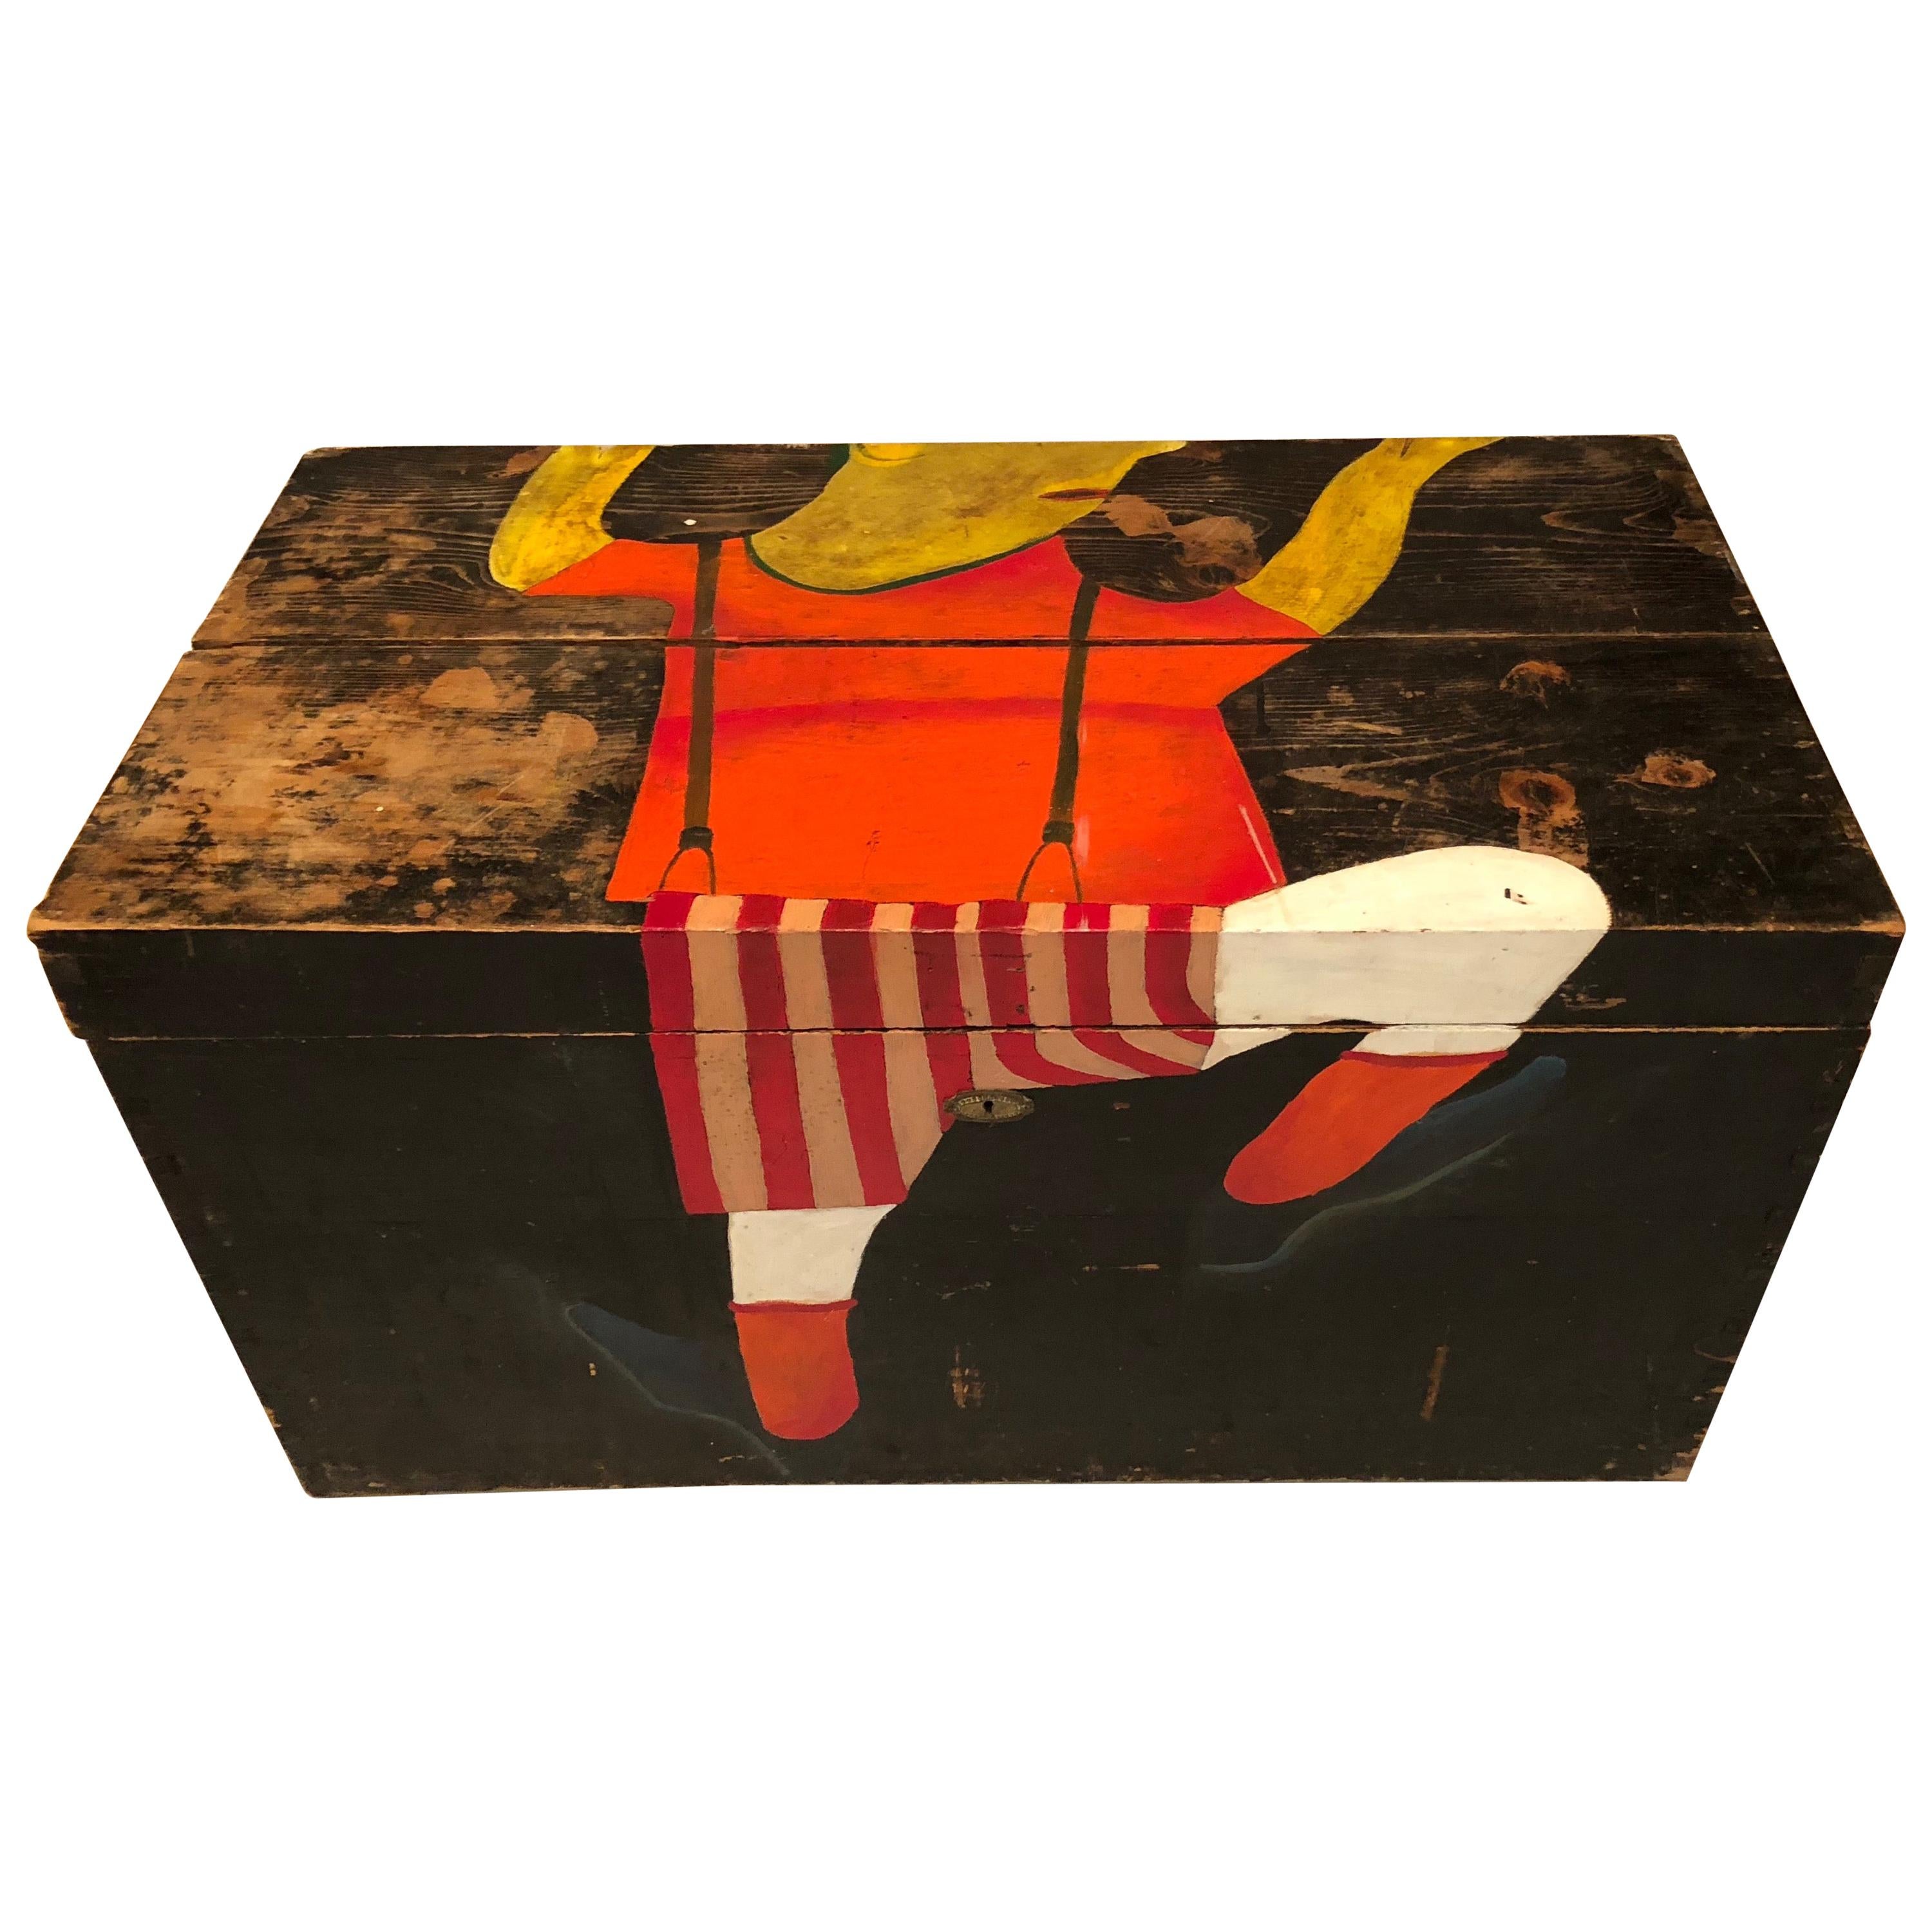 Trunk from 19th Century with Painting from the Artist Vlado Kadnár For Sale